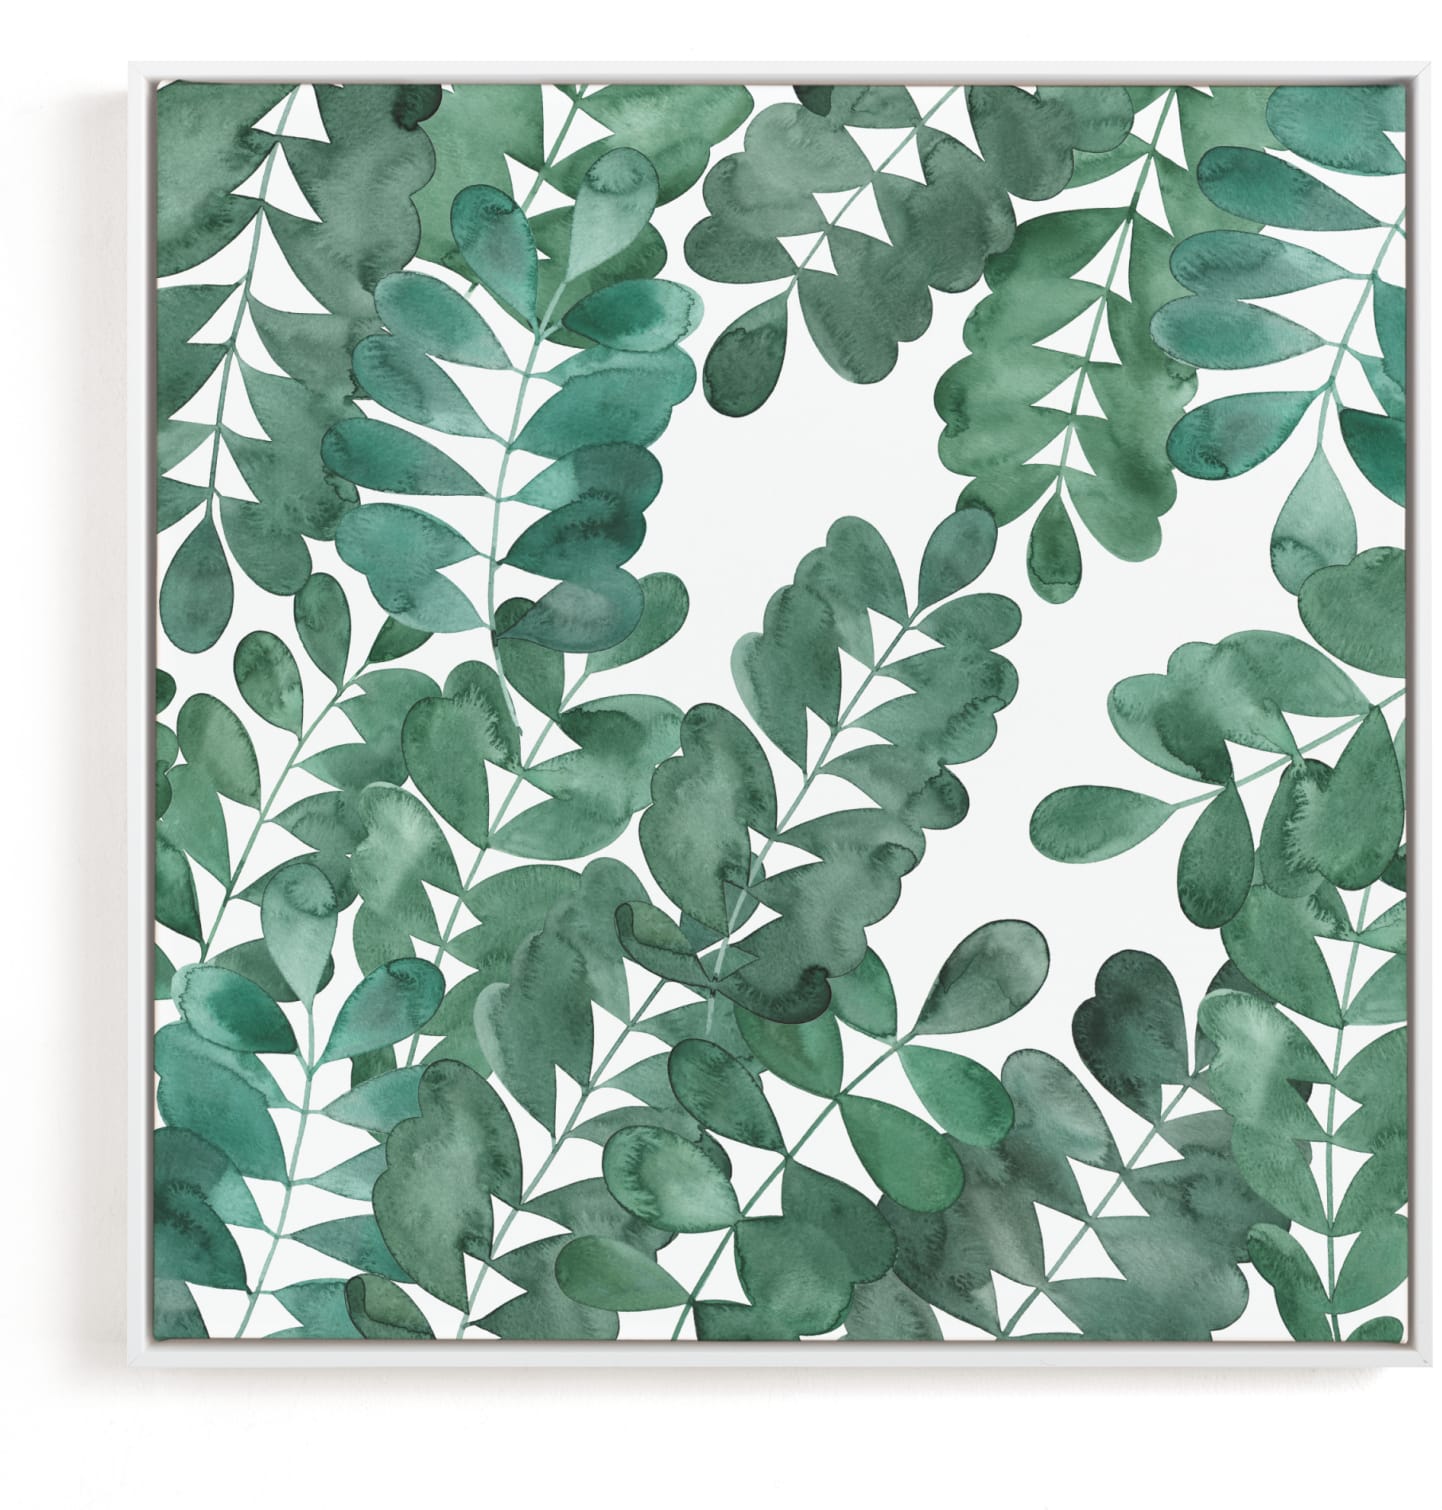 This is a white art by Natalie Ryan called Leafy Bowers.